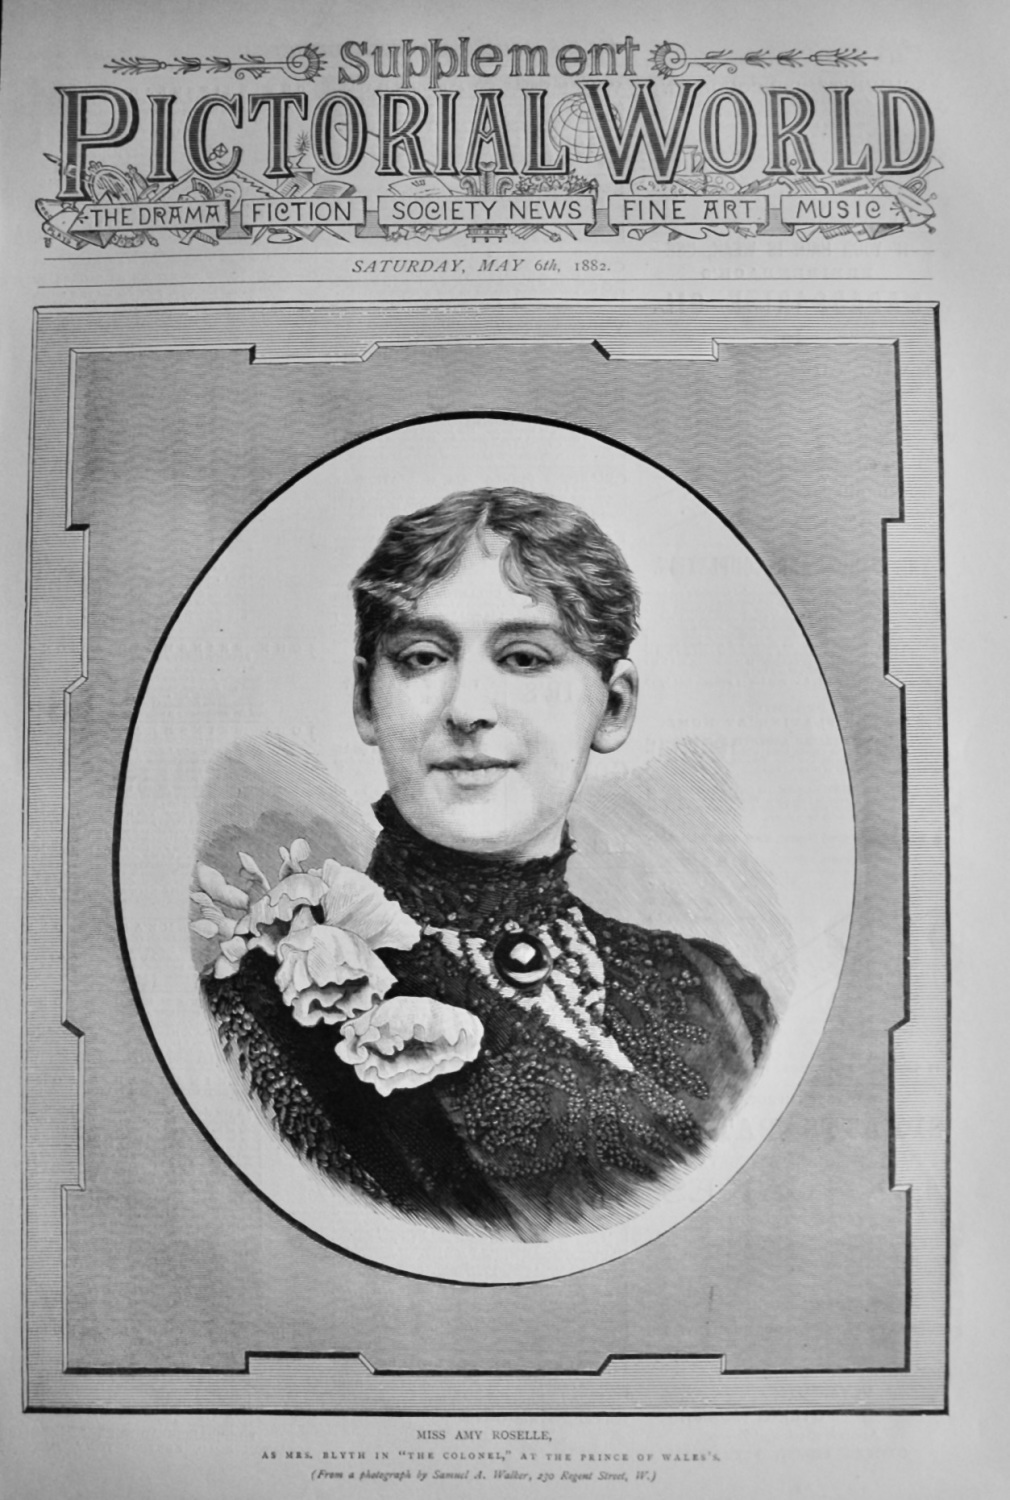 Miss Amy Roselle, as Mrs. Blyth in 